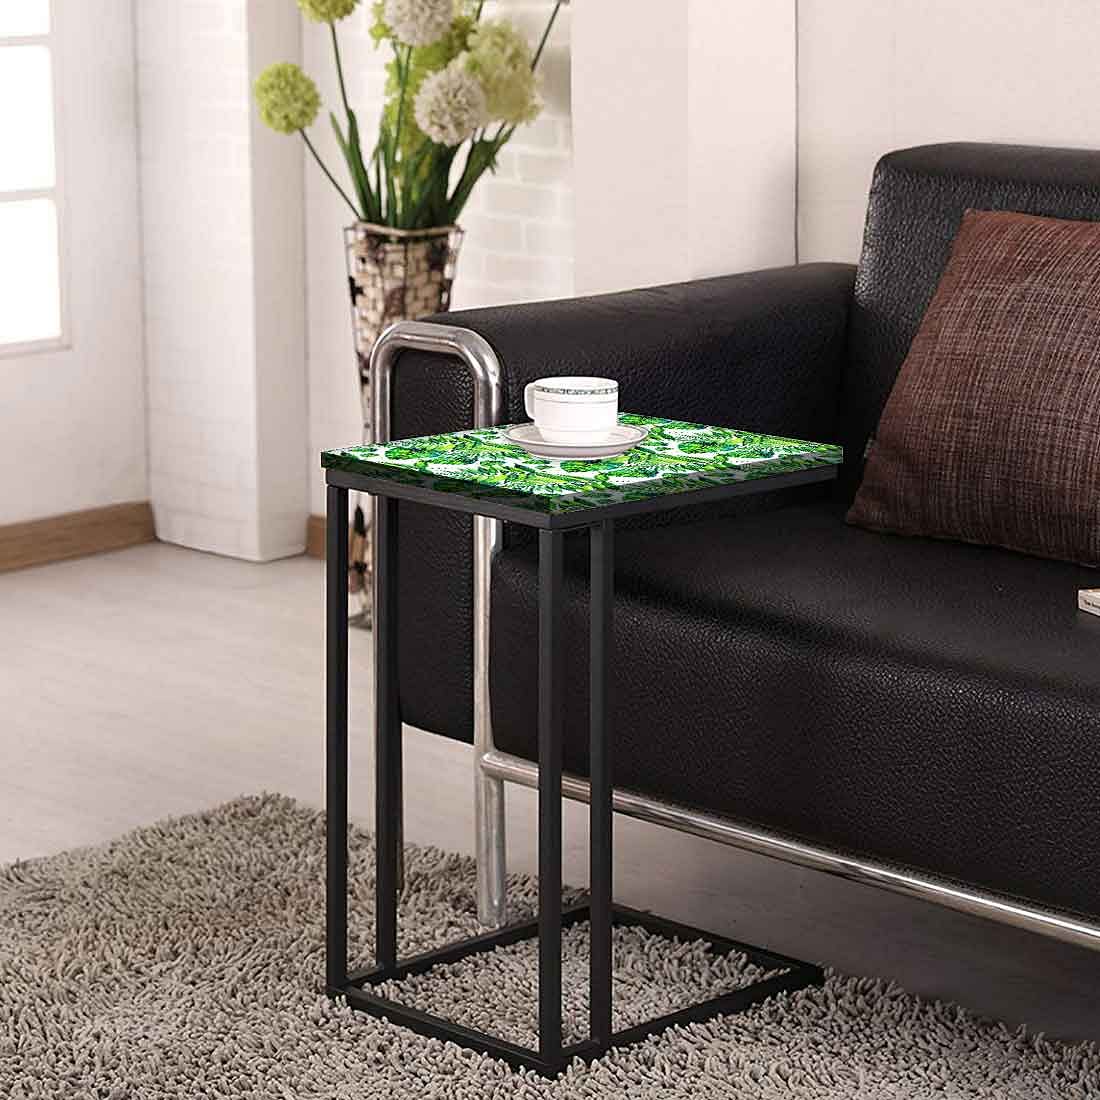 C Shaped End Table For Sofa - Green Tropical Leaf Nutcase